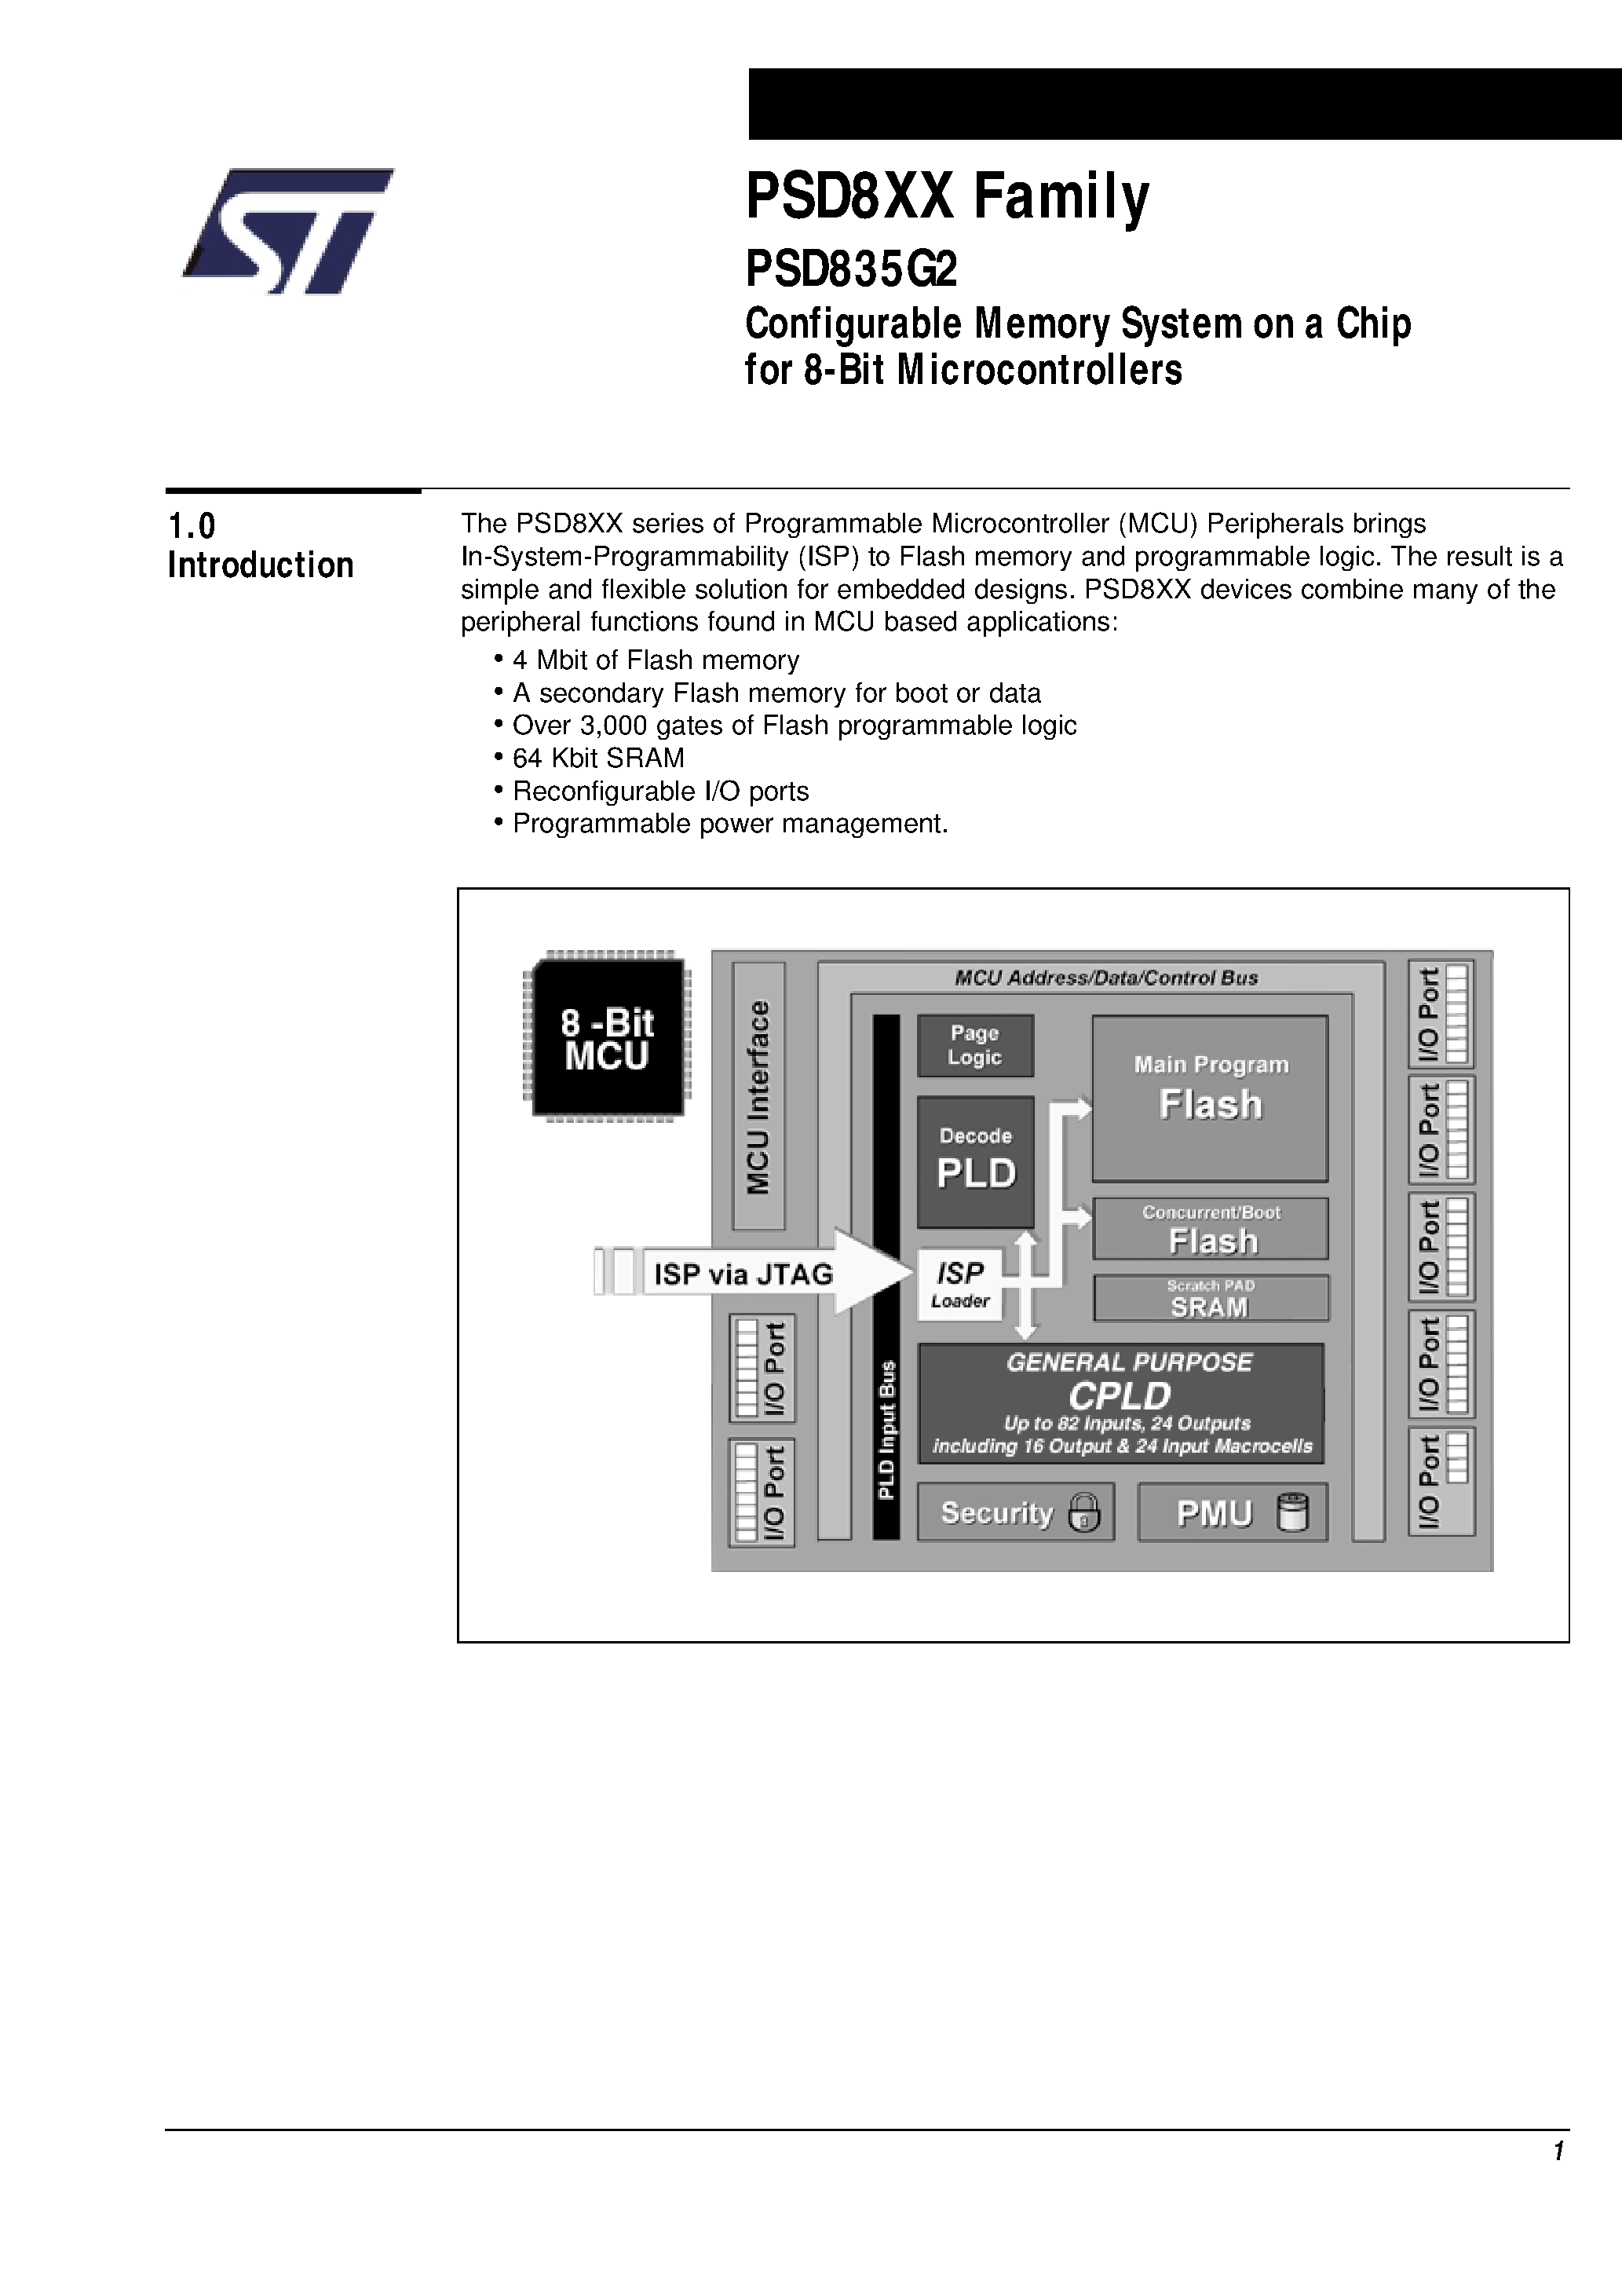 Datasheet PSD835F1V-A-70MI - Configurable Memory System on a Chip for 8-Bit Microcontrollers page 2